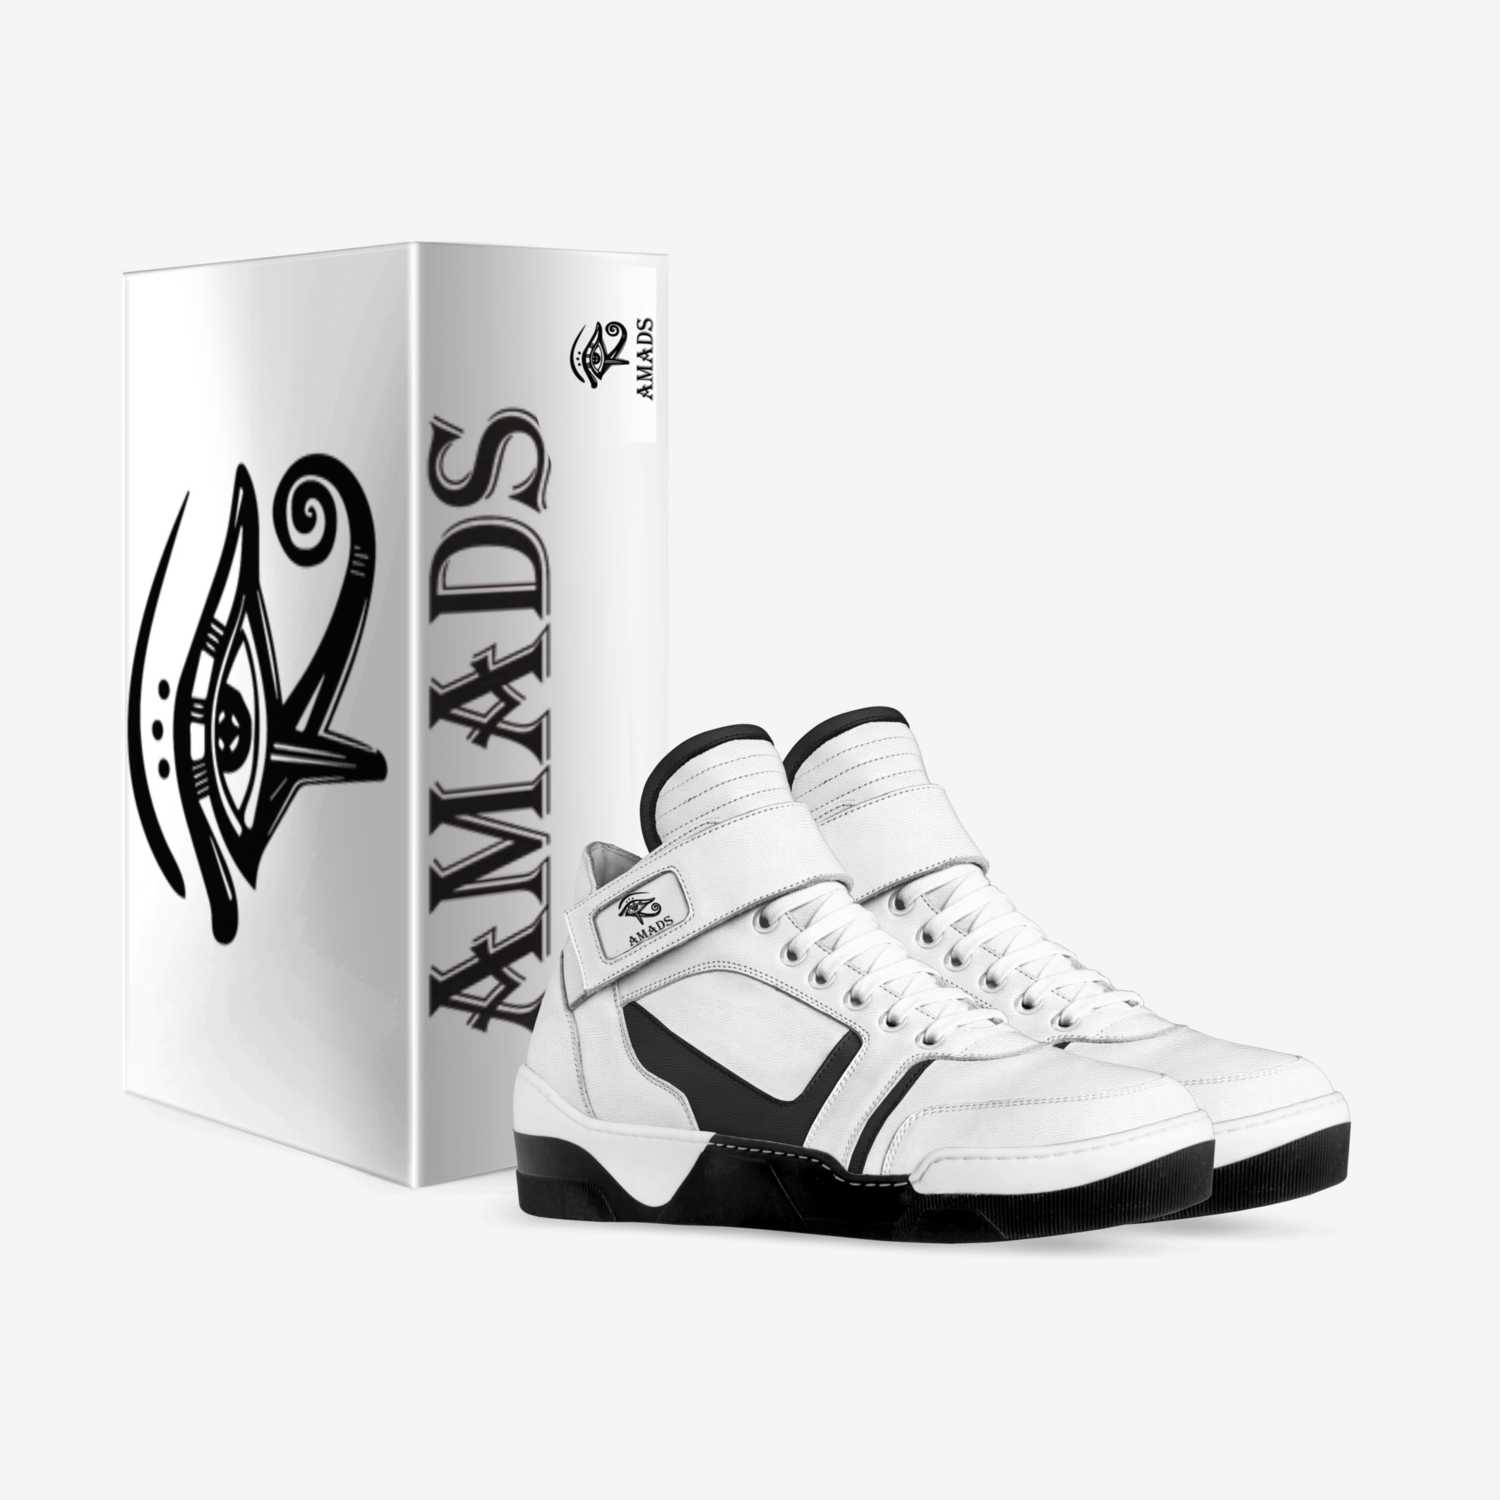 AMADS custom made in Italy shoes by Aaron Madero | Box view